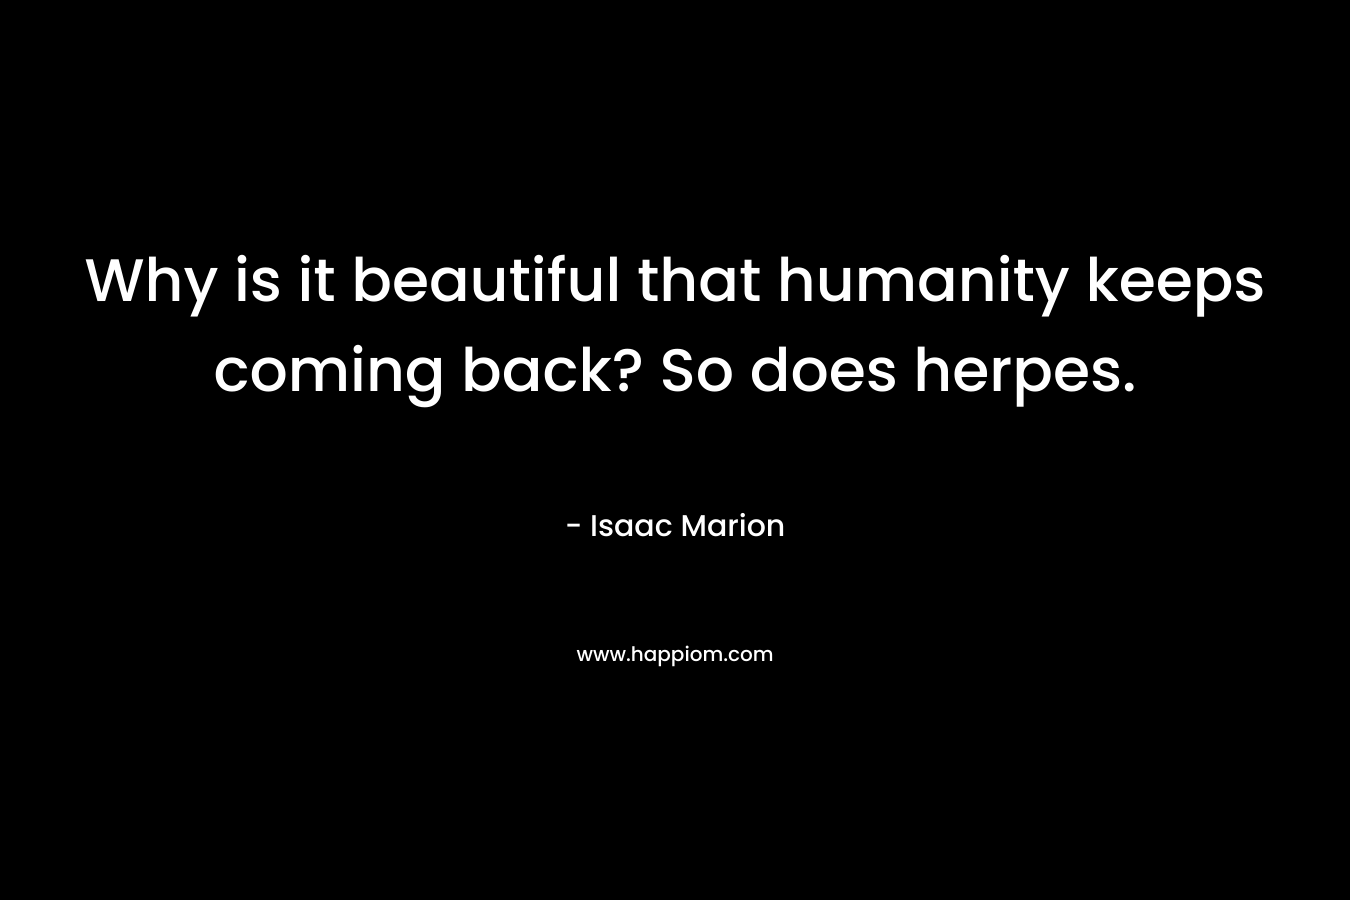 Why is it beautiful that humanity keeps coming back? So does herpes.